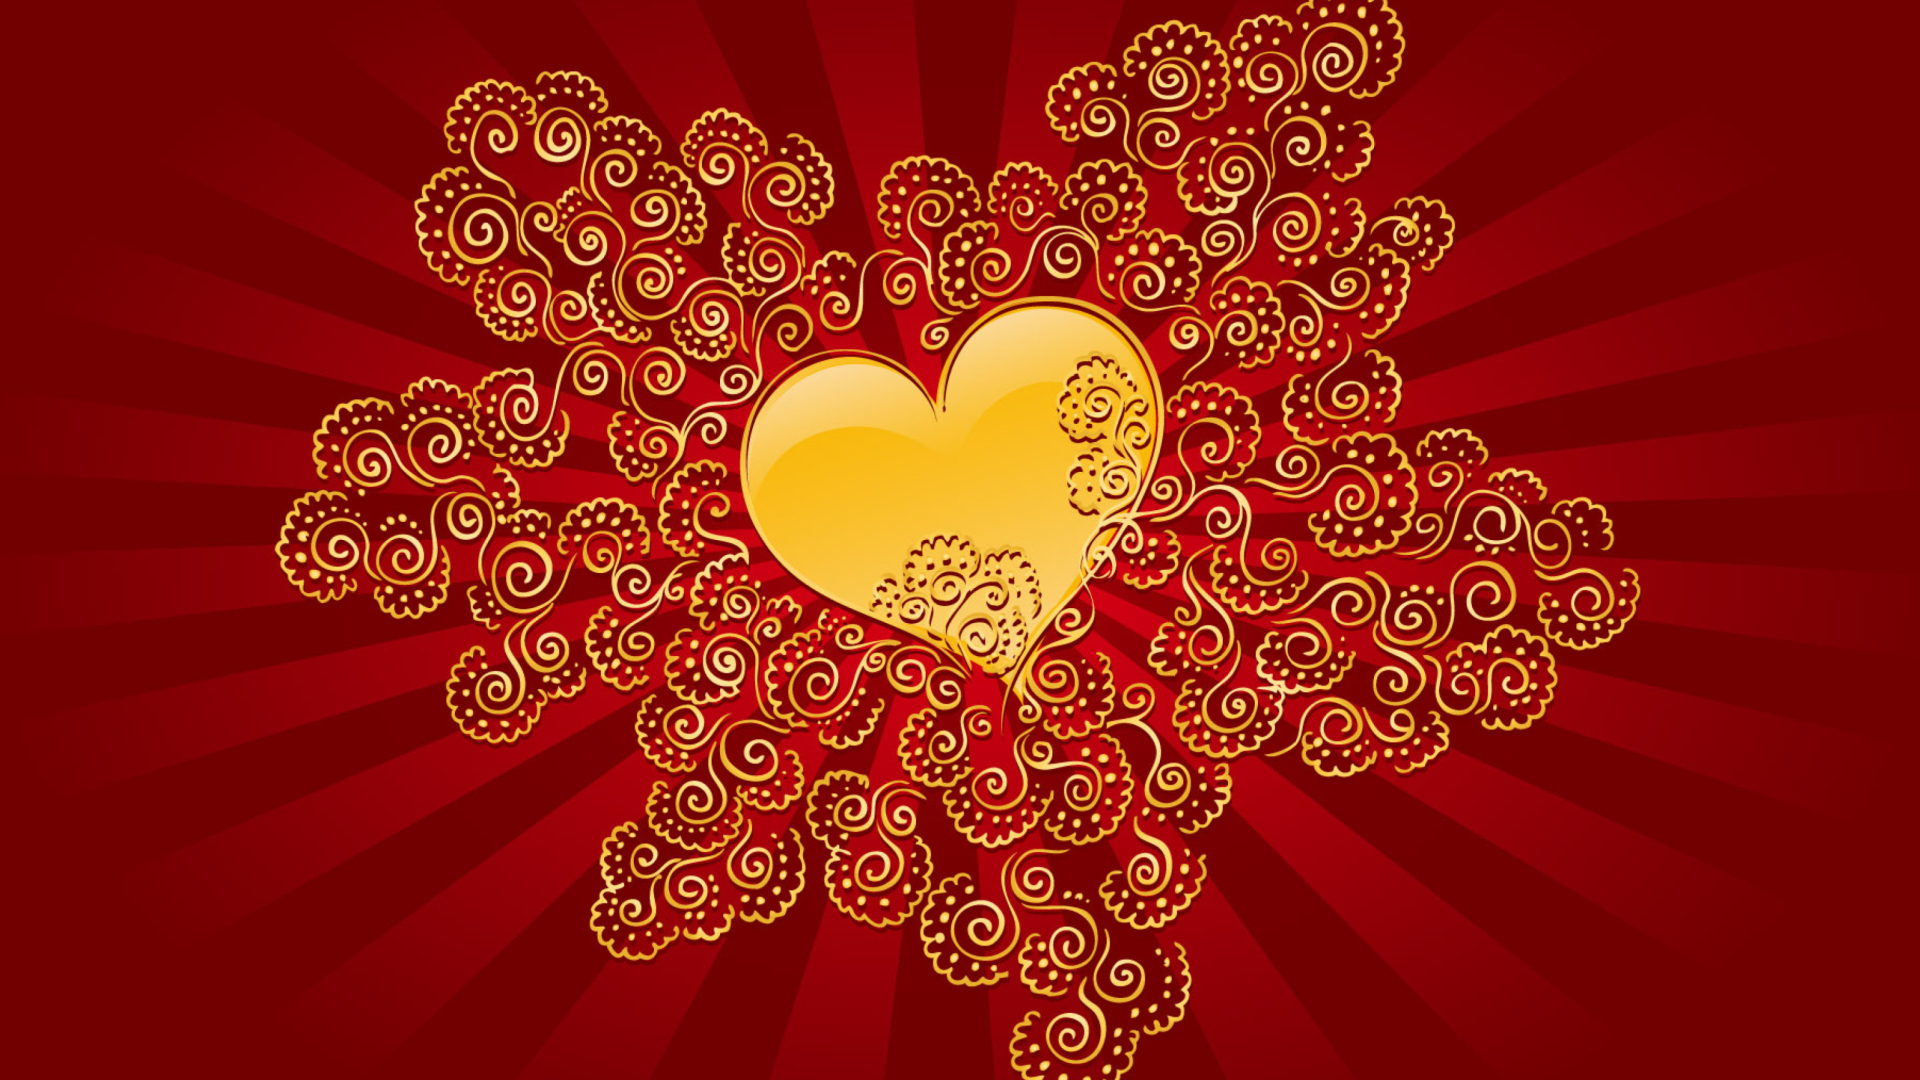 Yellow Heart On Red wallpaper 1920x1080